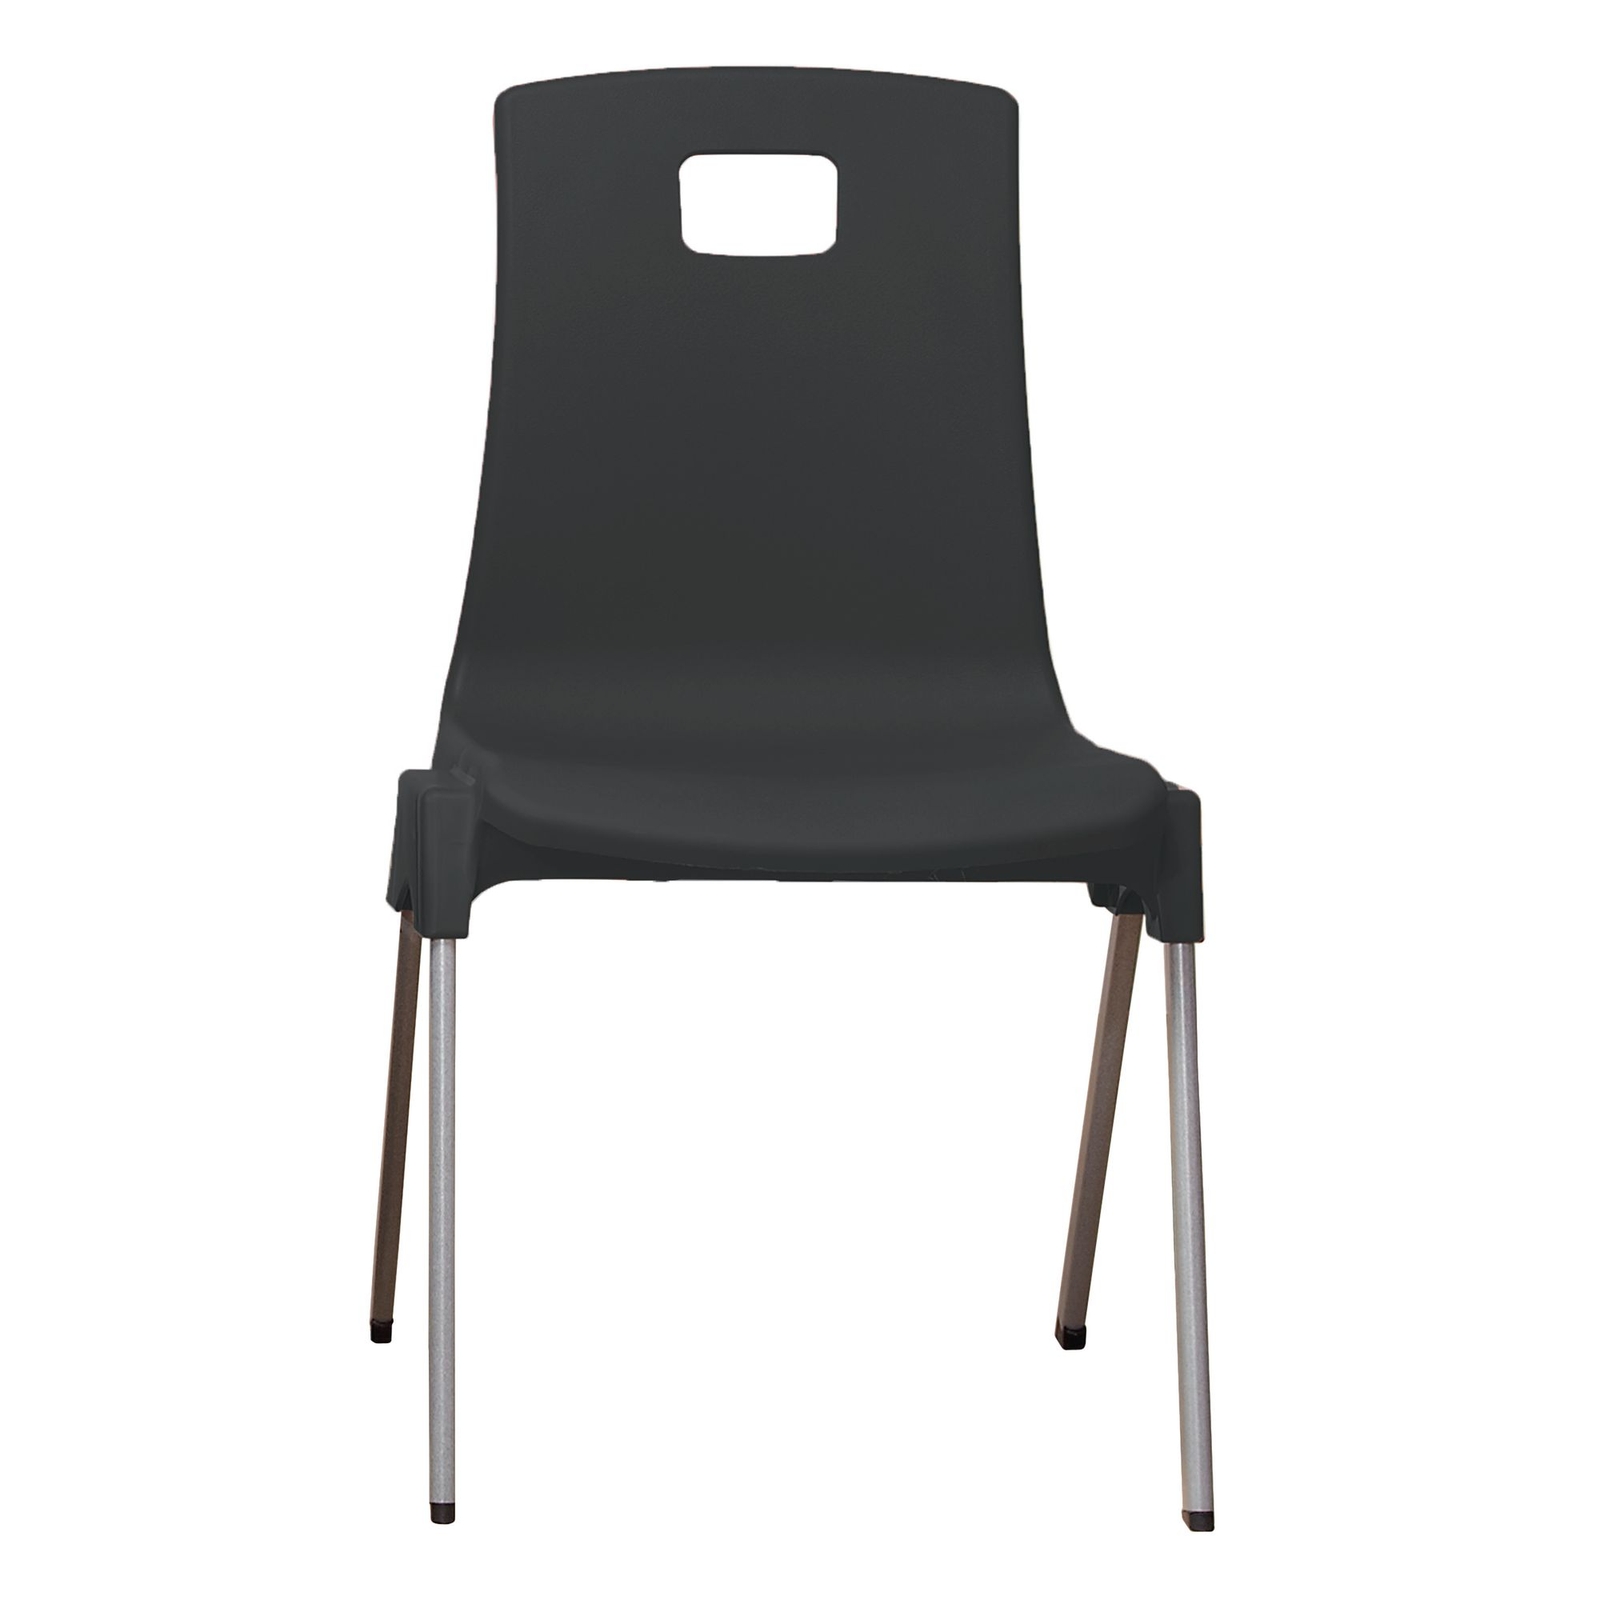 ST Chair - Size B - 310mm - Charcoal